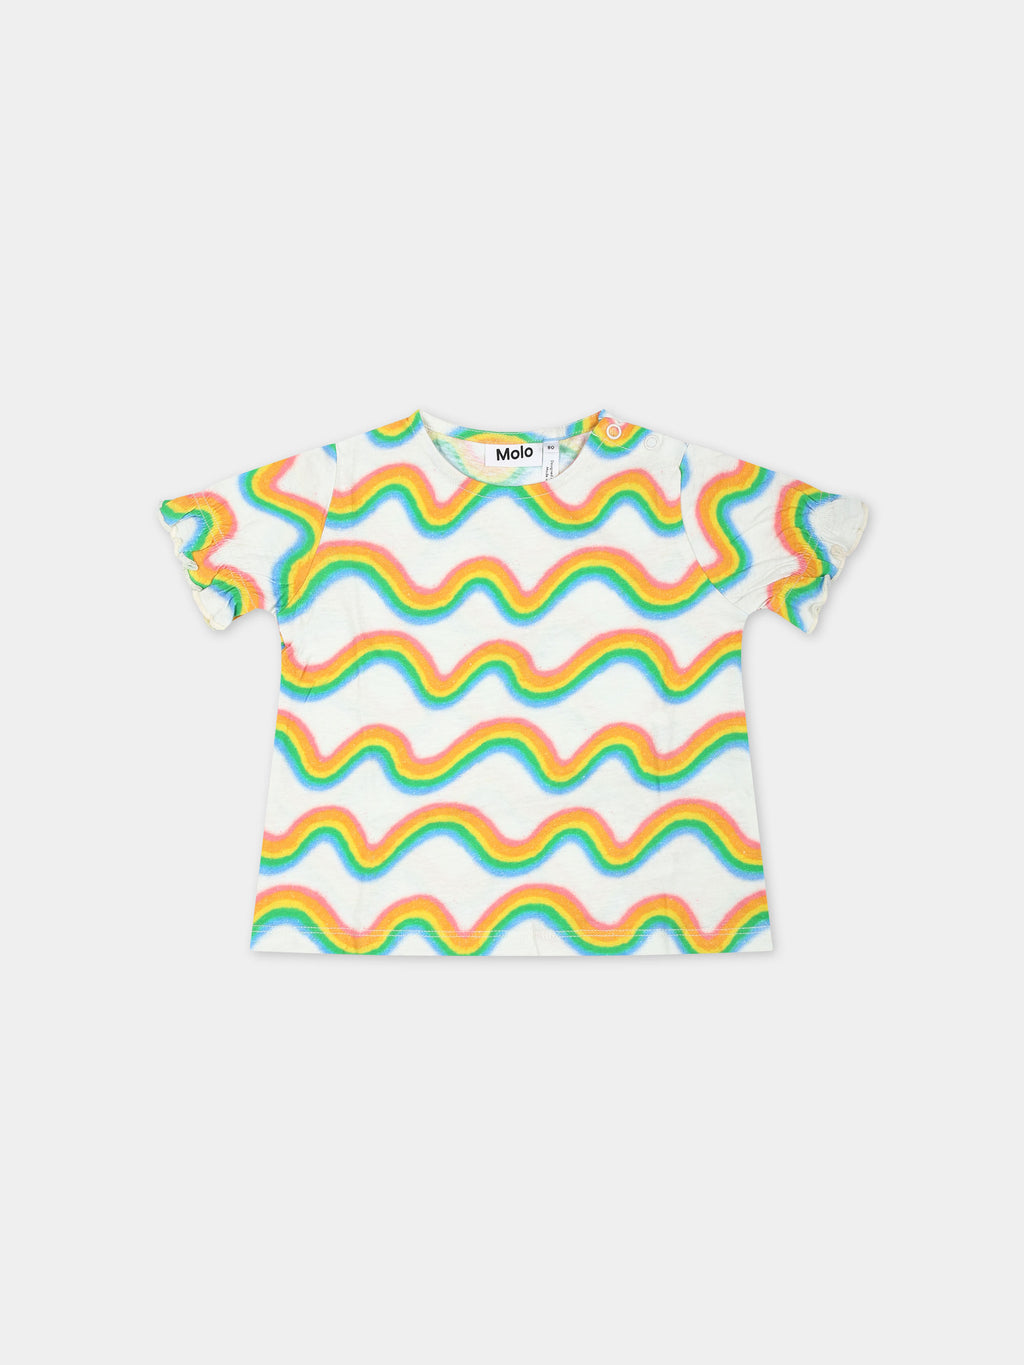 White t-shirt for baby girl with rainbow print